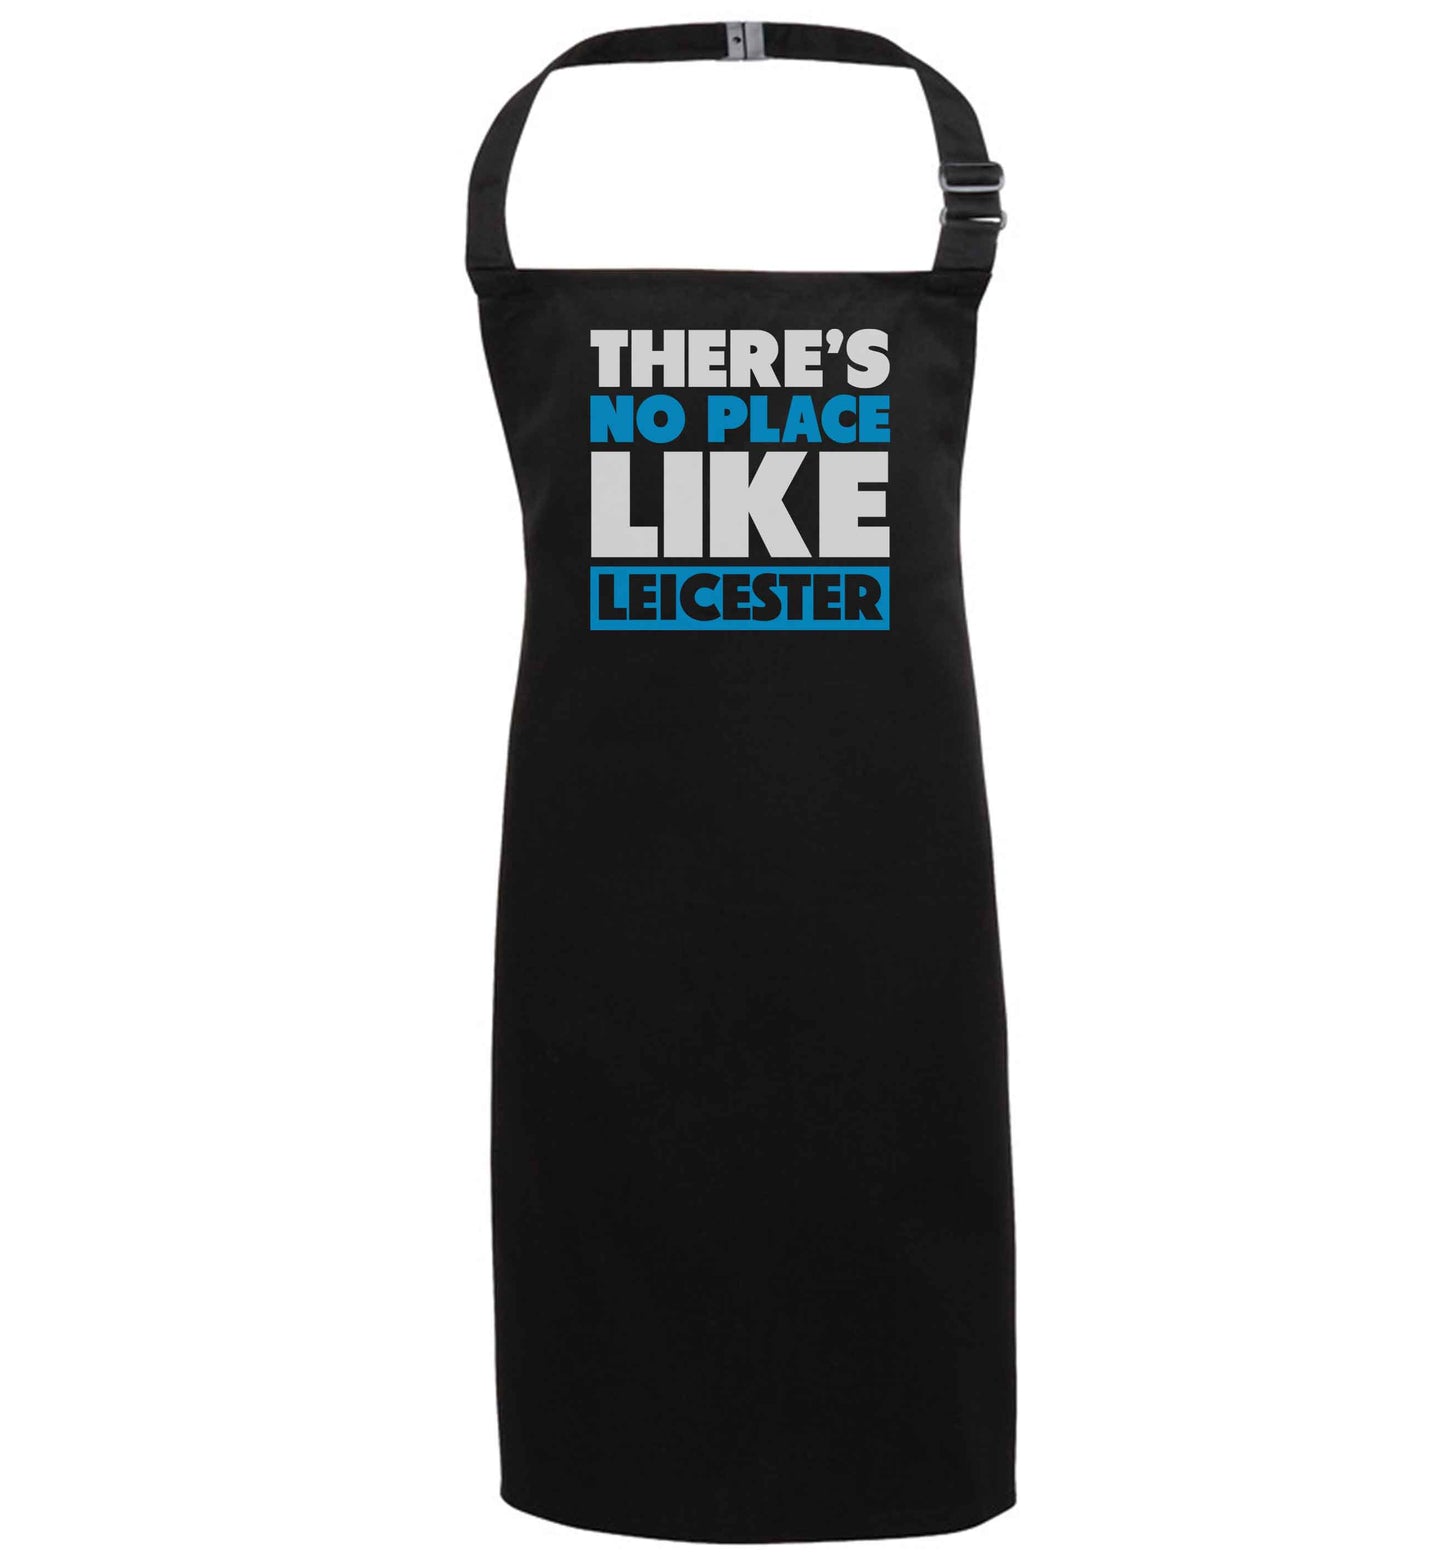 There's no place like Leicester black apron 7-10 years